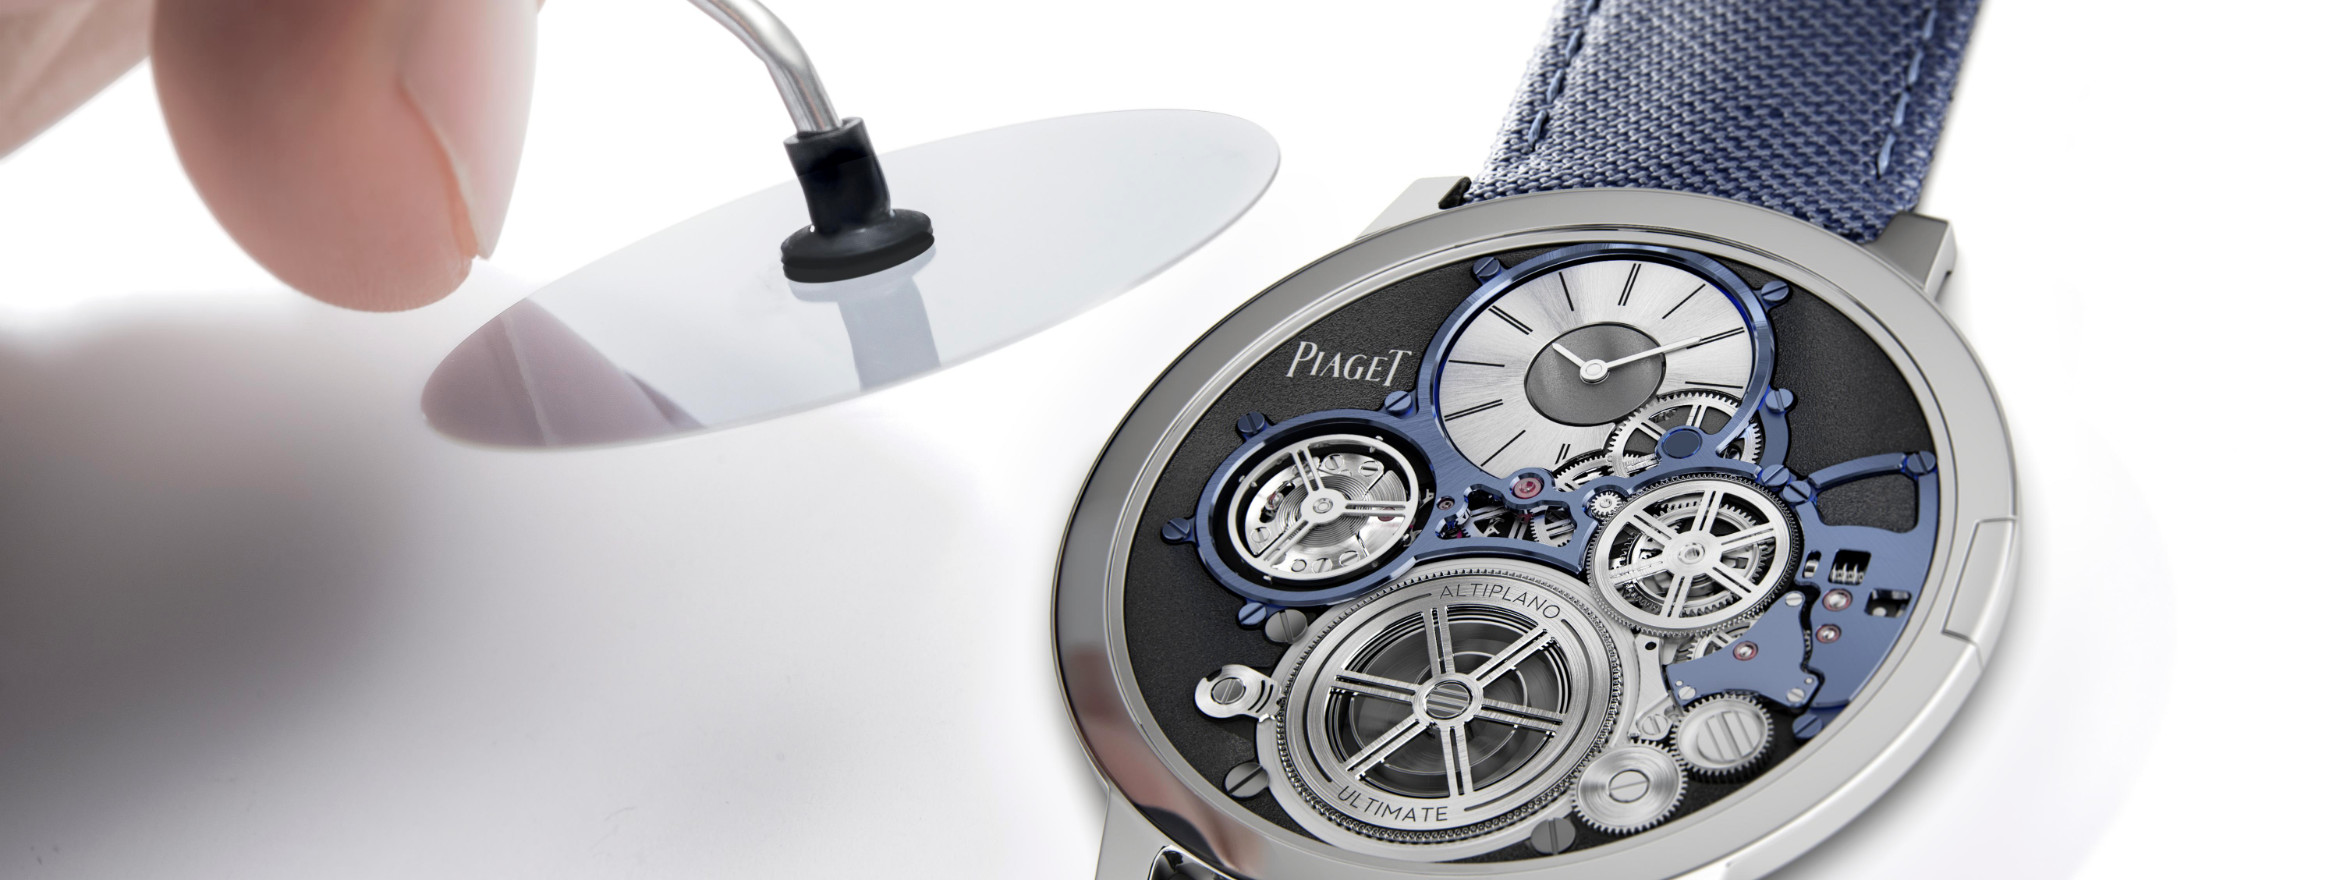 140 Years of Piaget Innovation